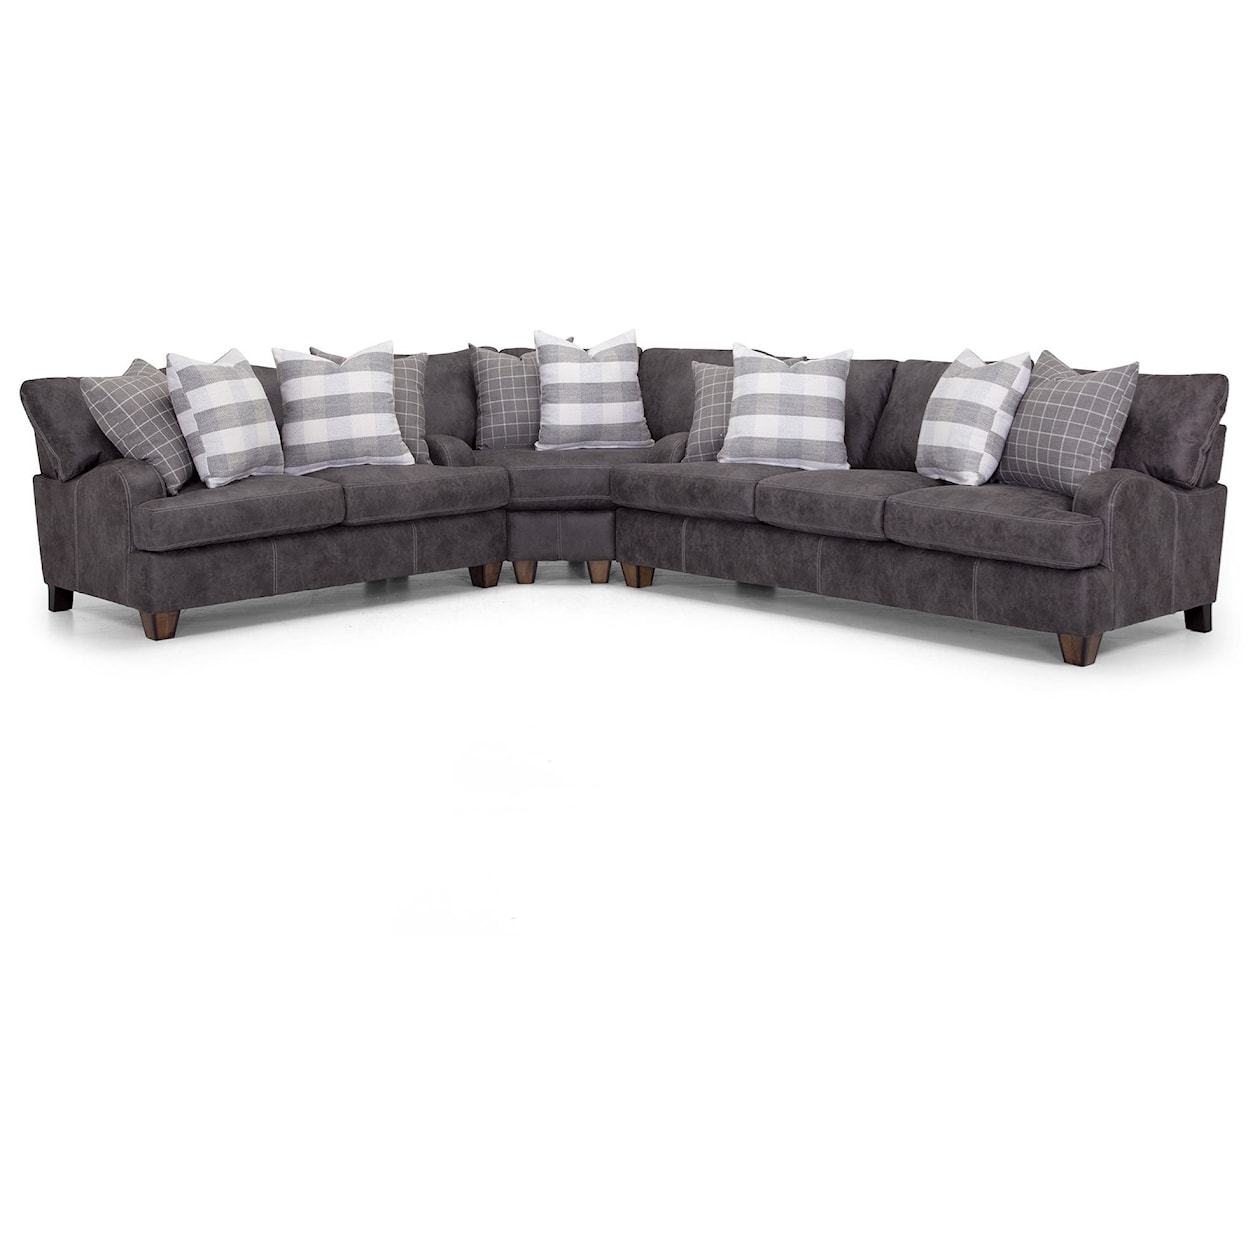 Franklin 993 Darby Sectional